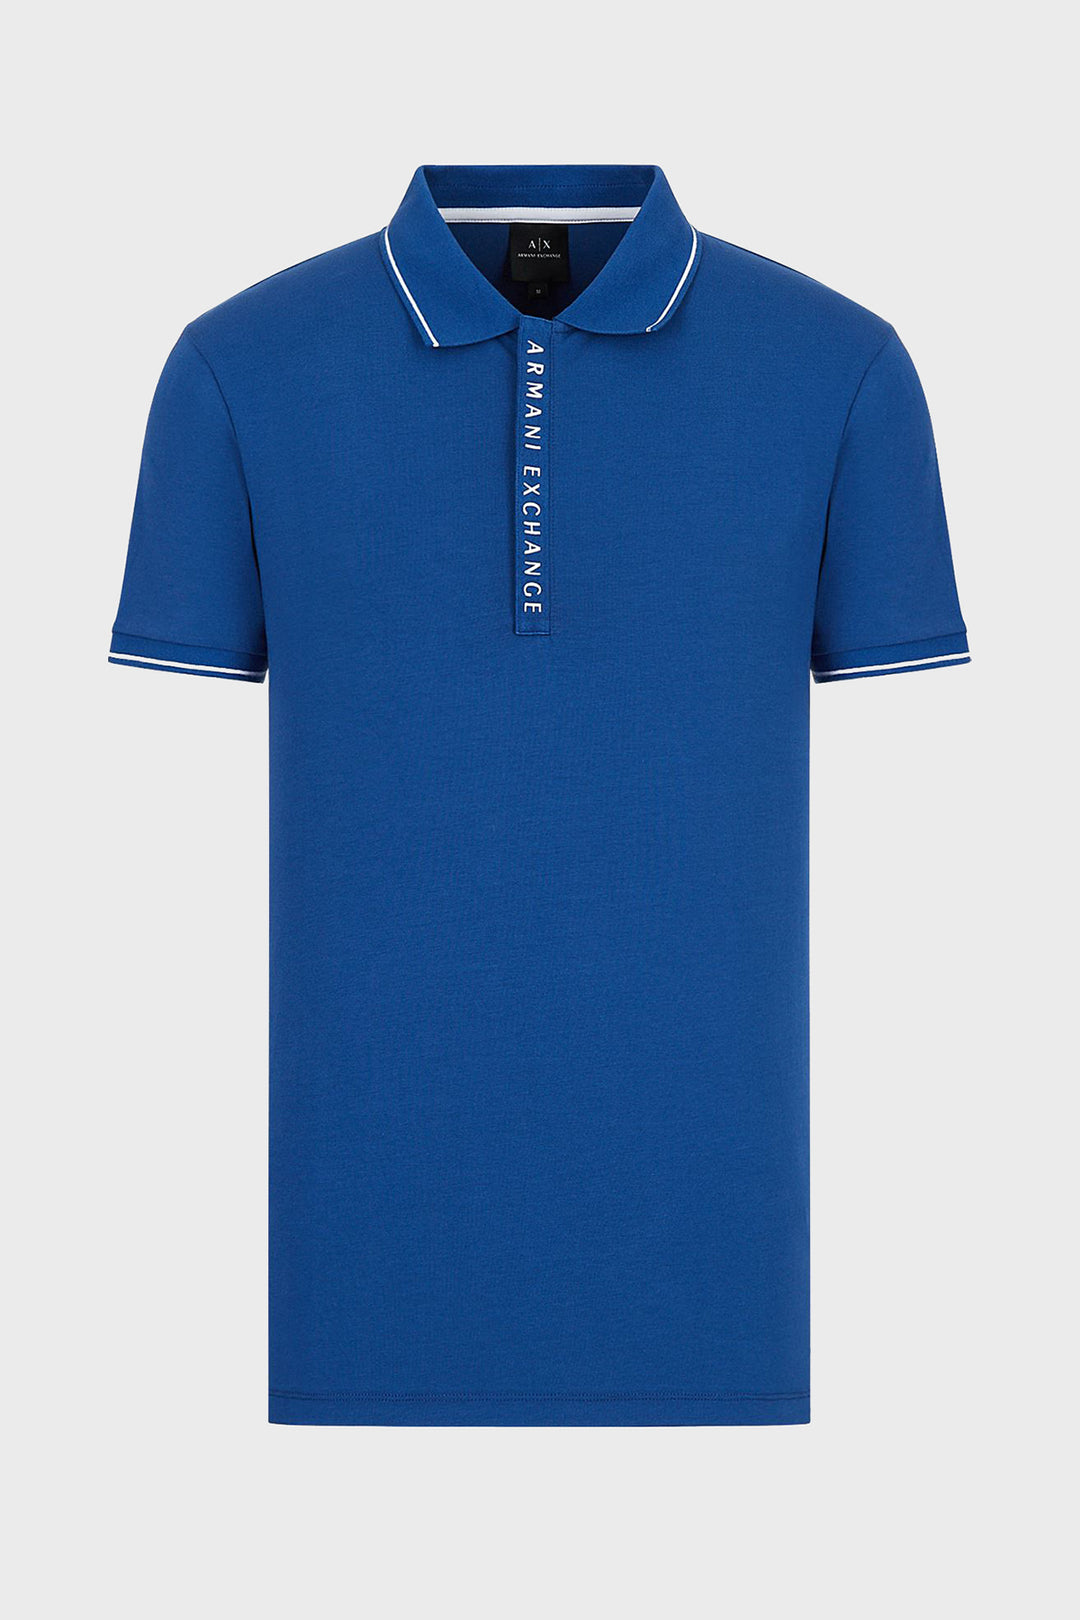 Ar.mani Mens S/S Polo AT-8NZF71